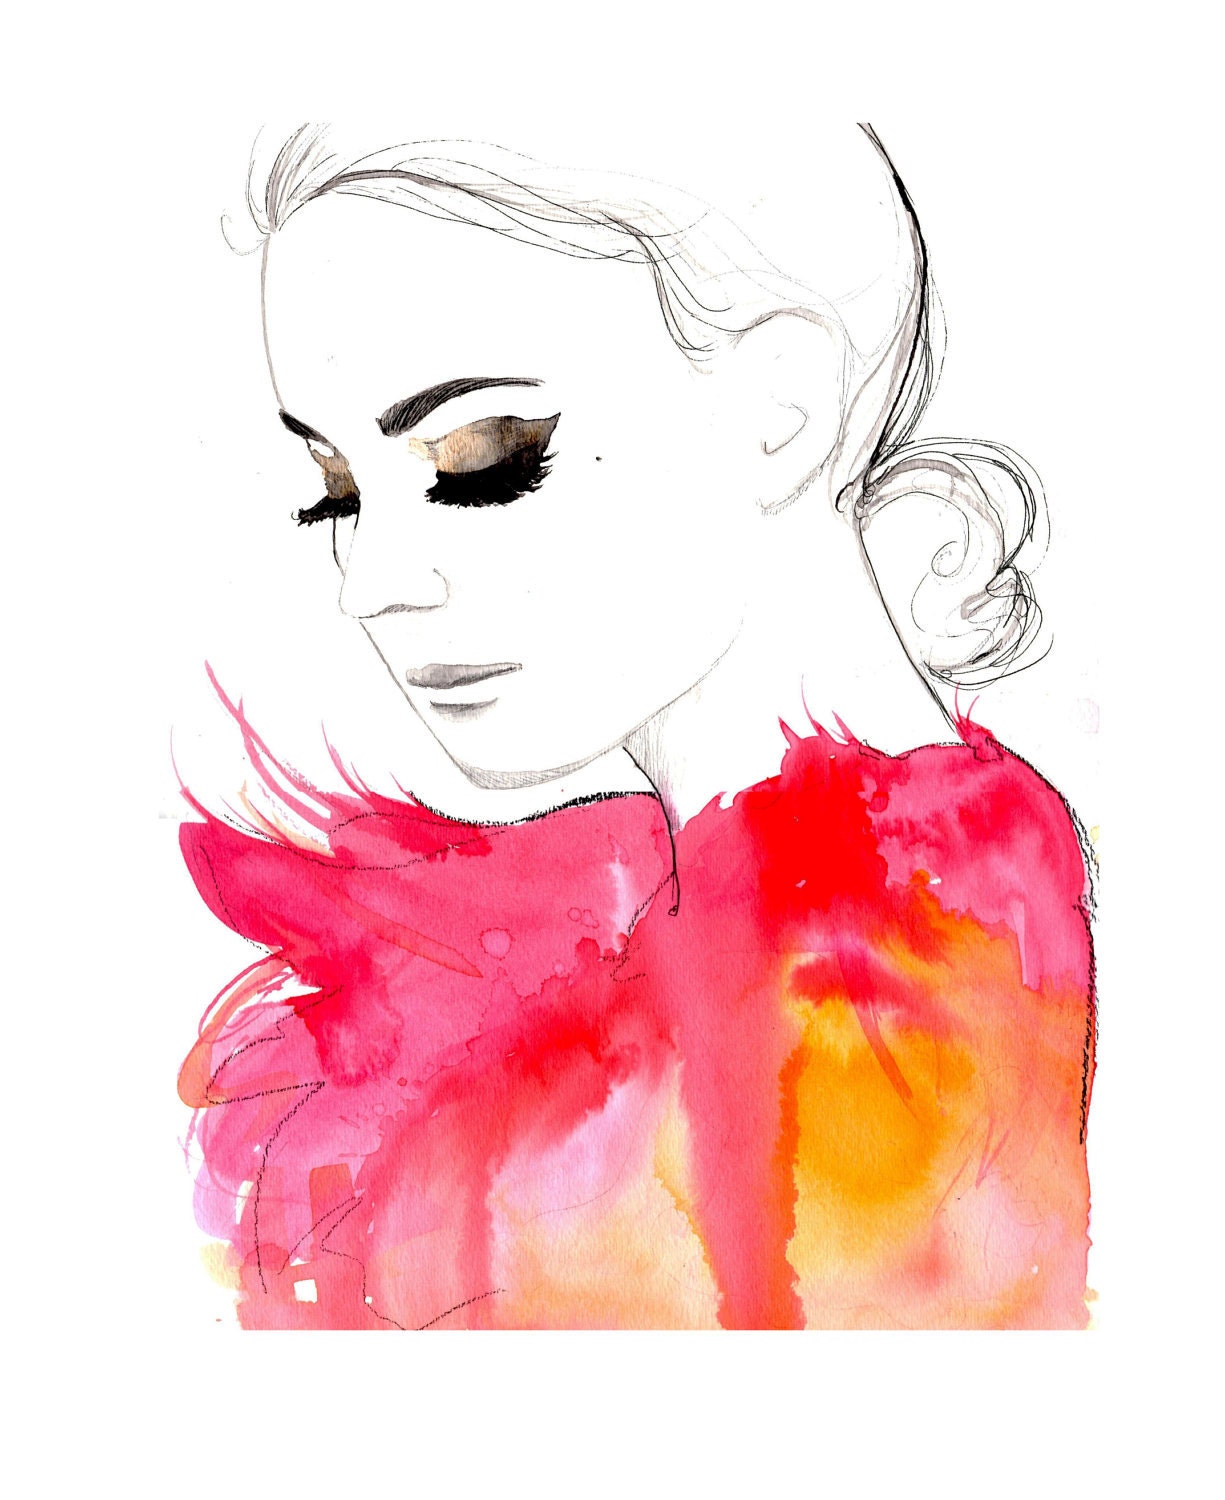 Original watercolor and pen fashion illustration by Jessica Durrant titled - Golden Eye